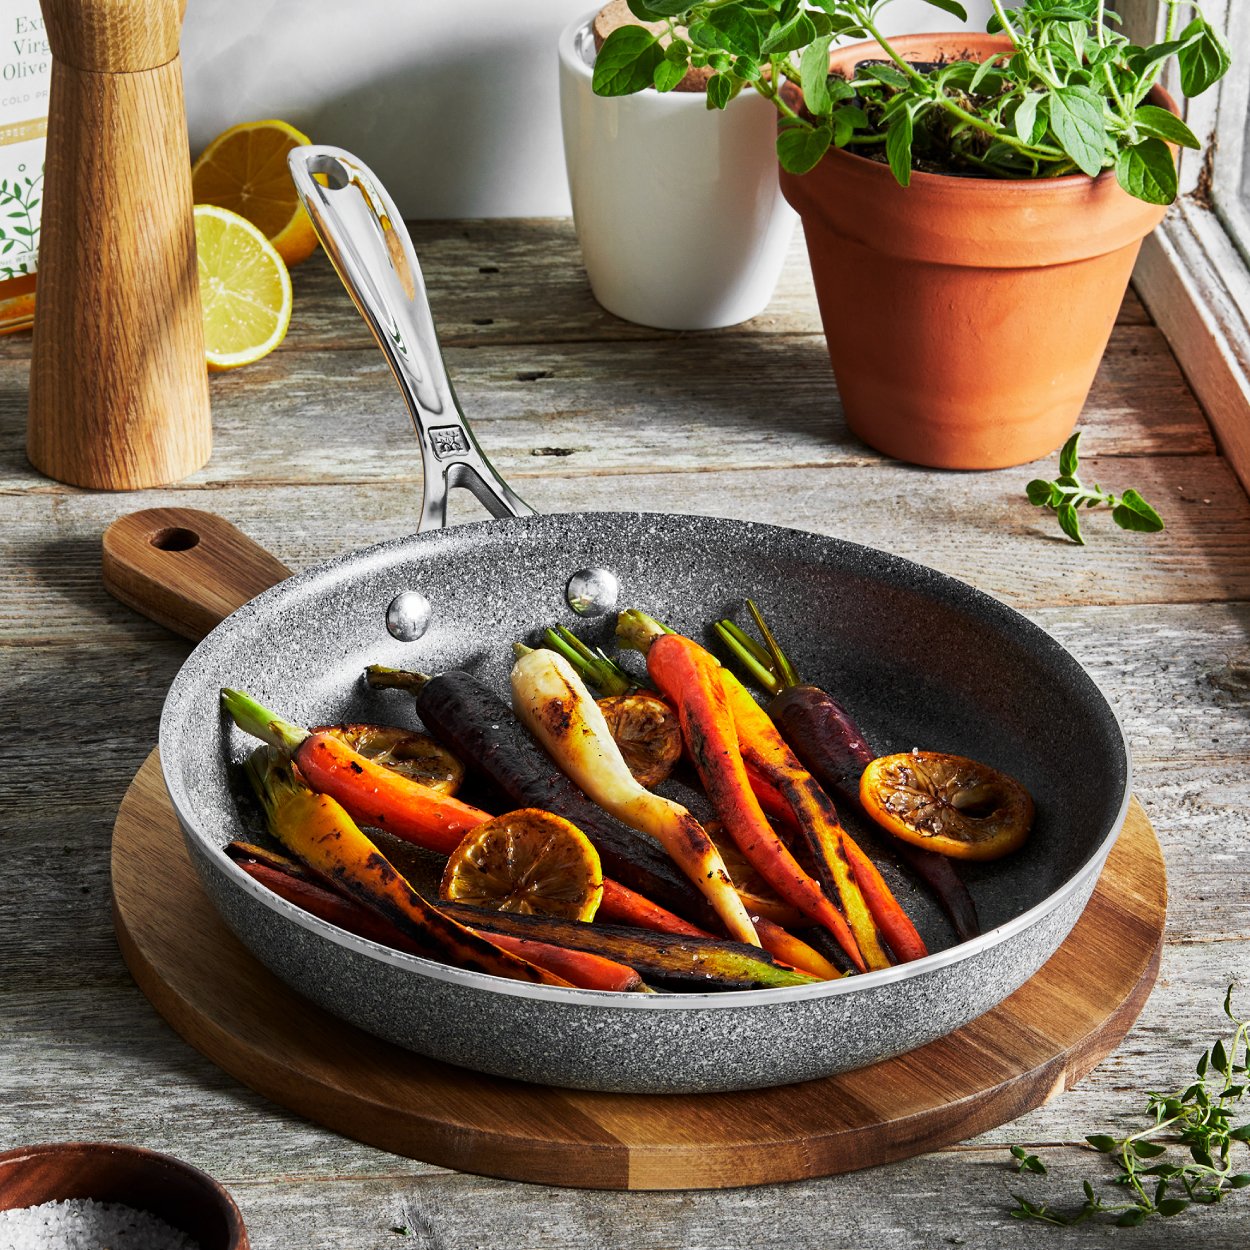 https://www.zwilling.com/on/demandware.static/-/Sites-zwilling-us-Library/default/dwf50021b6/images/product-content/masonry-content/zwilling/cookware/vitale/ZW_VITALE_600-600_1.jpg